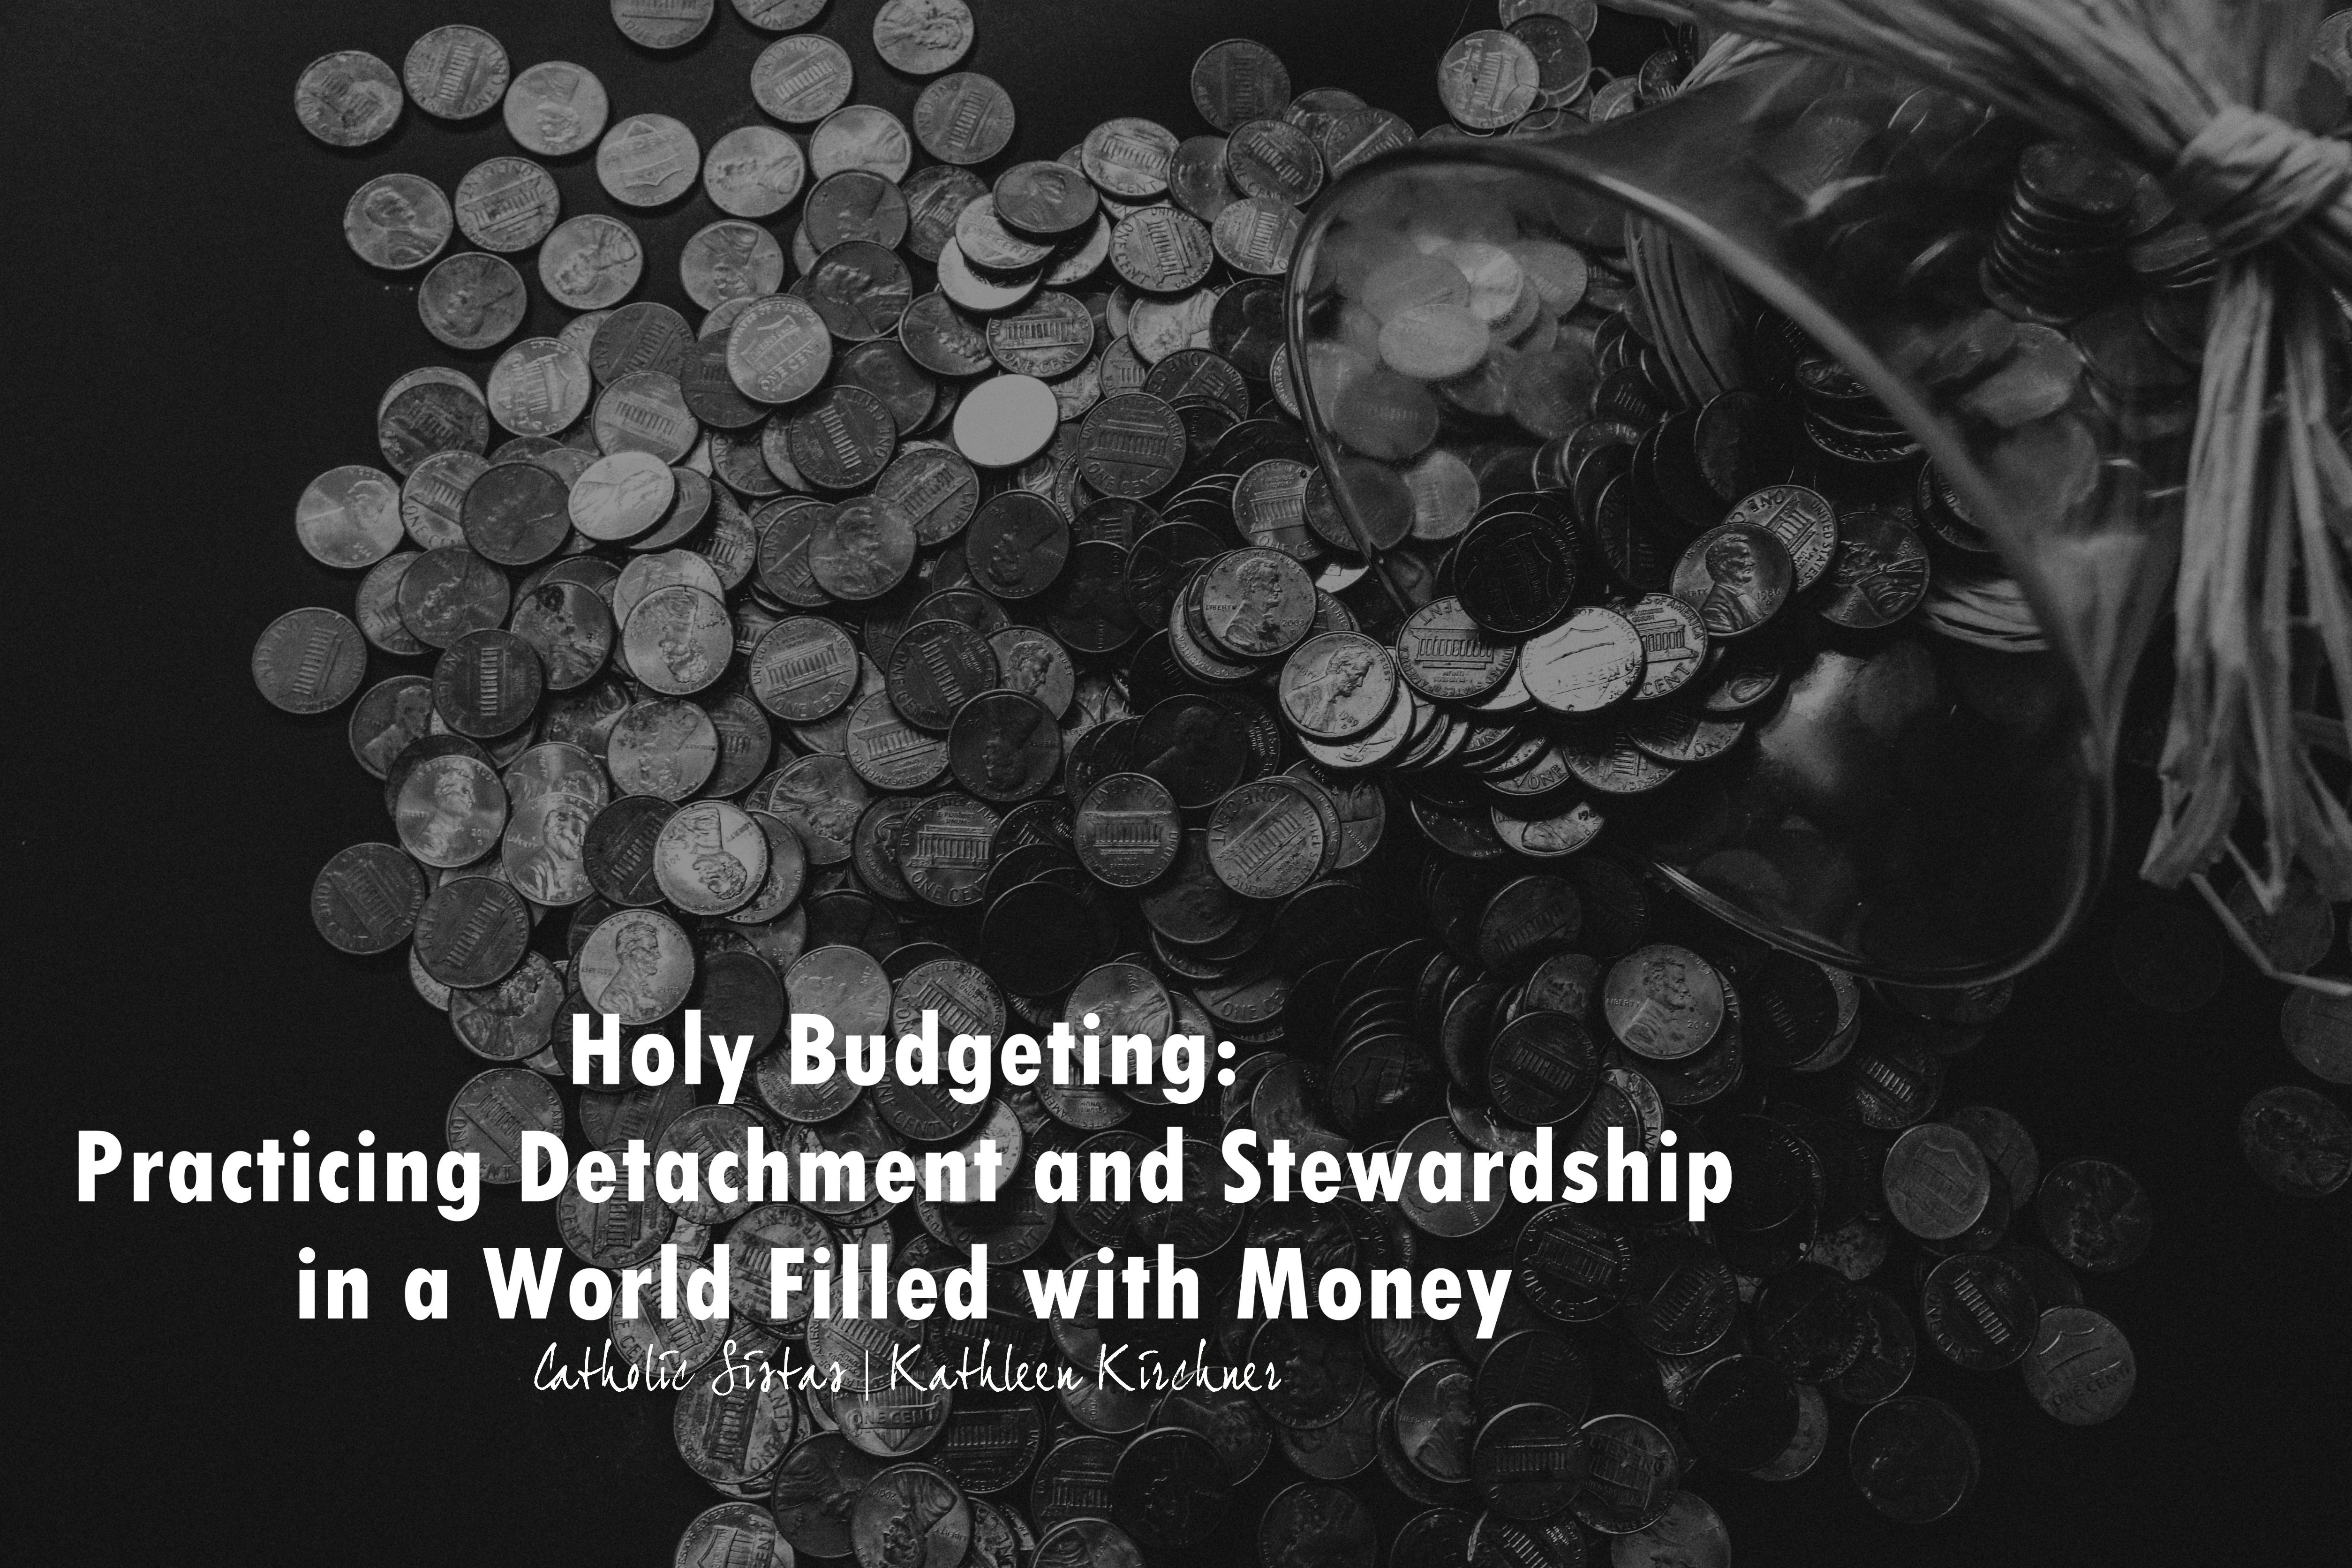 Holy Budgeting_ Practicing Detachment and Stewardship in a World Filled with Money